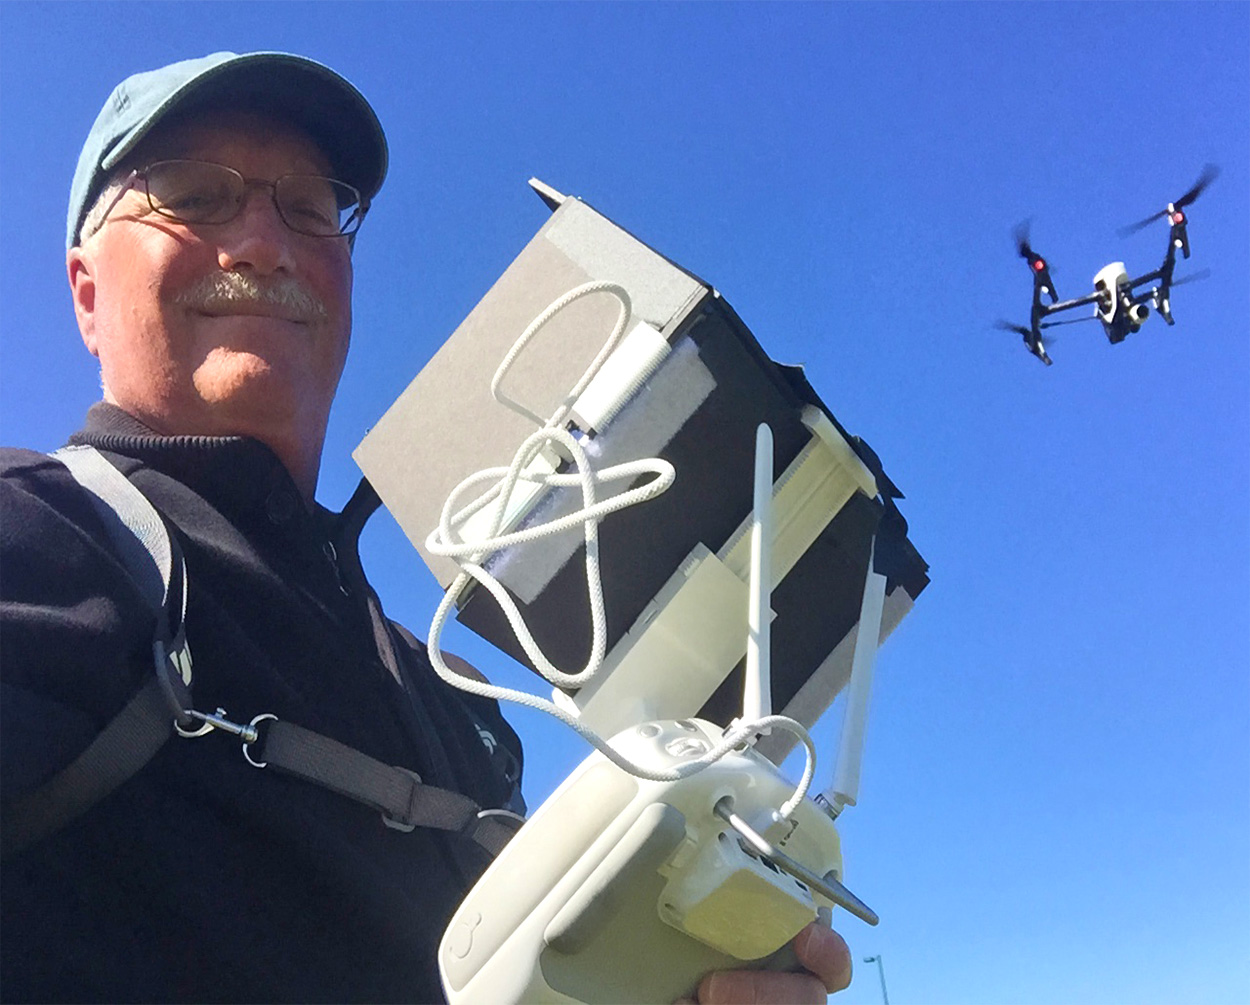 Dave with Inspire 1